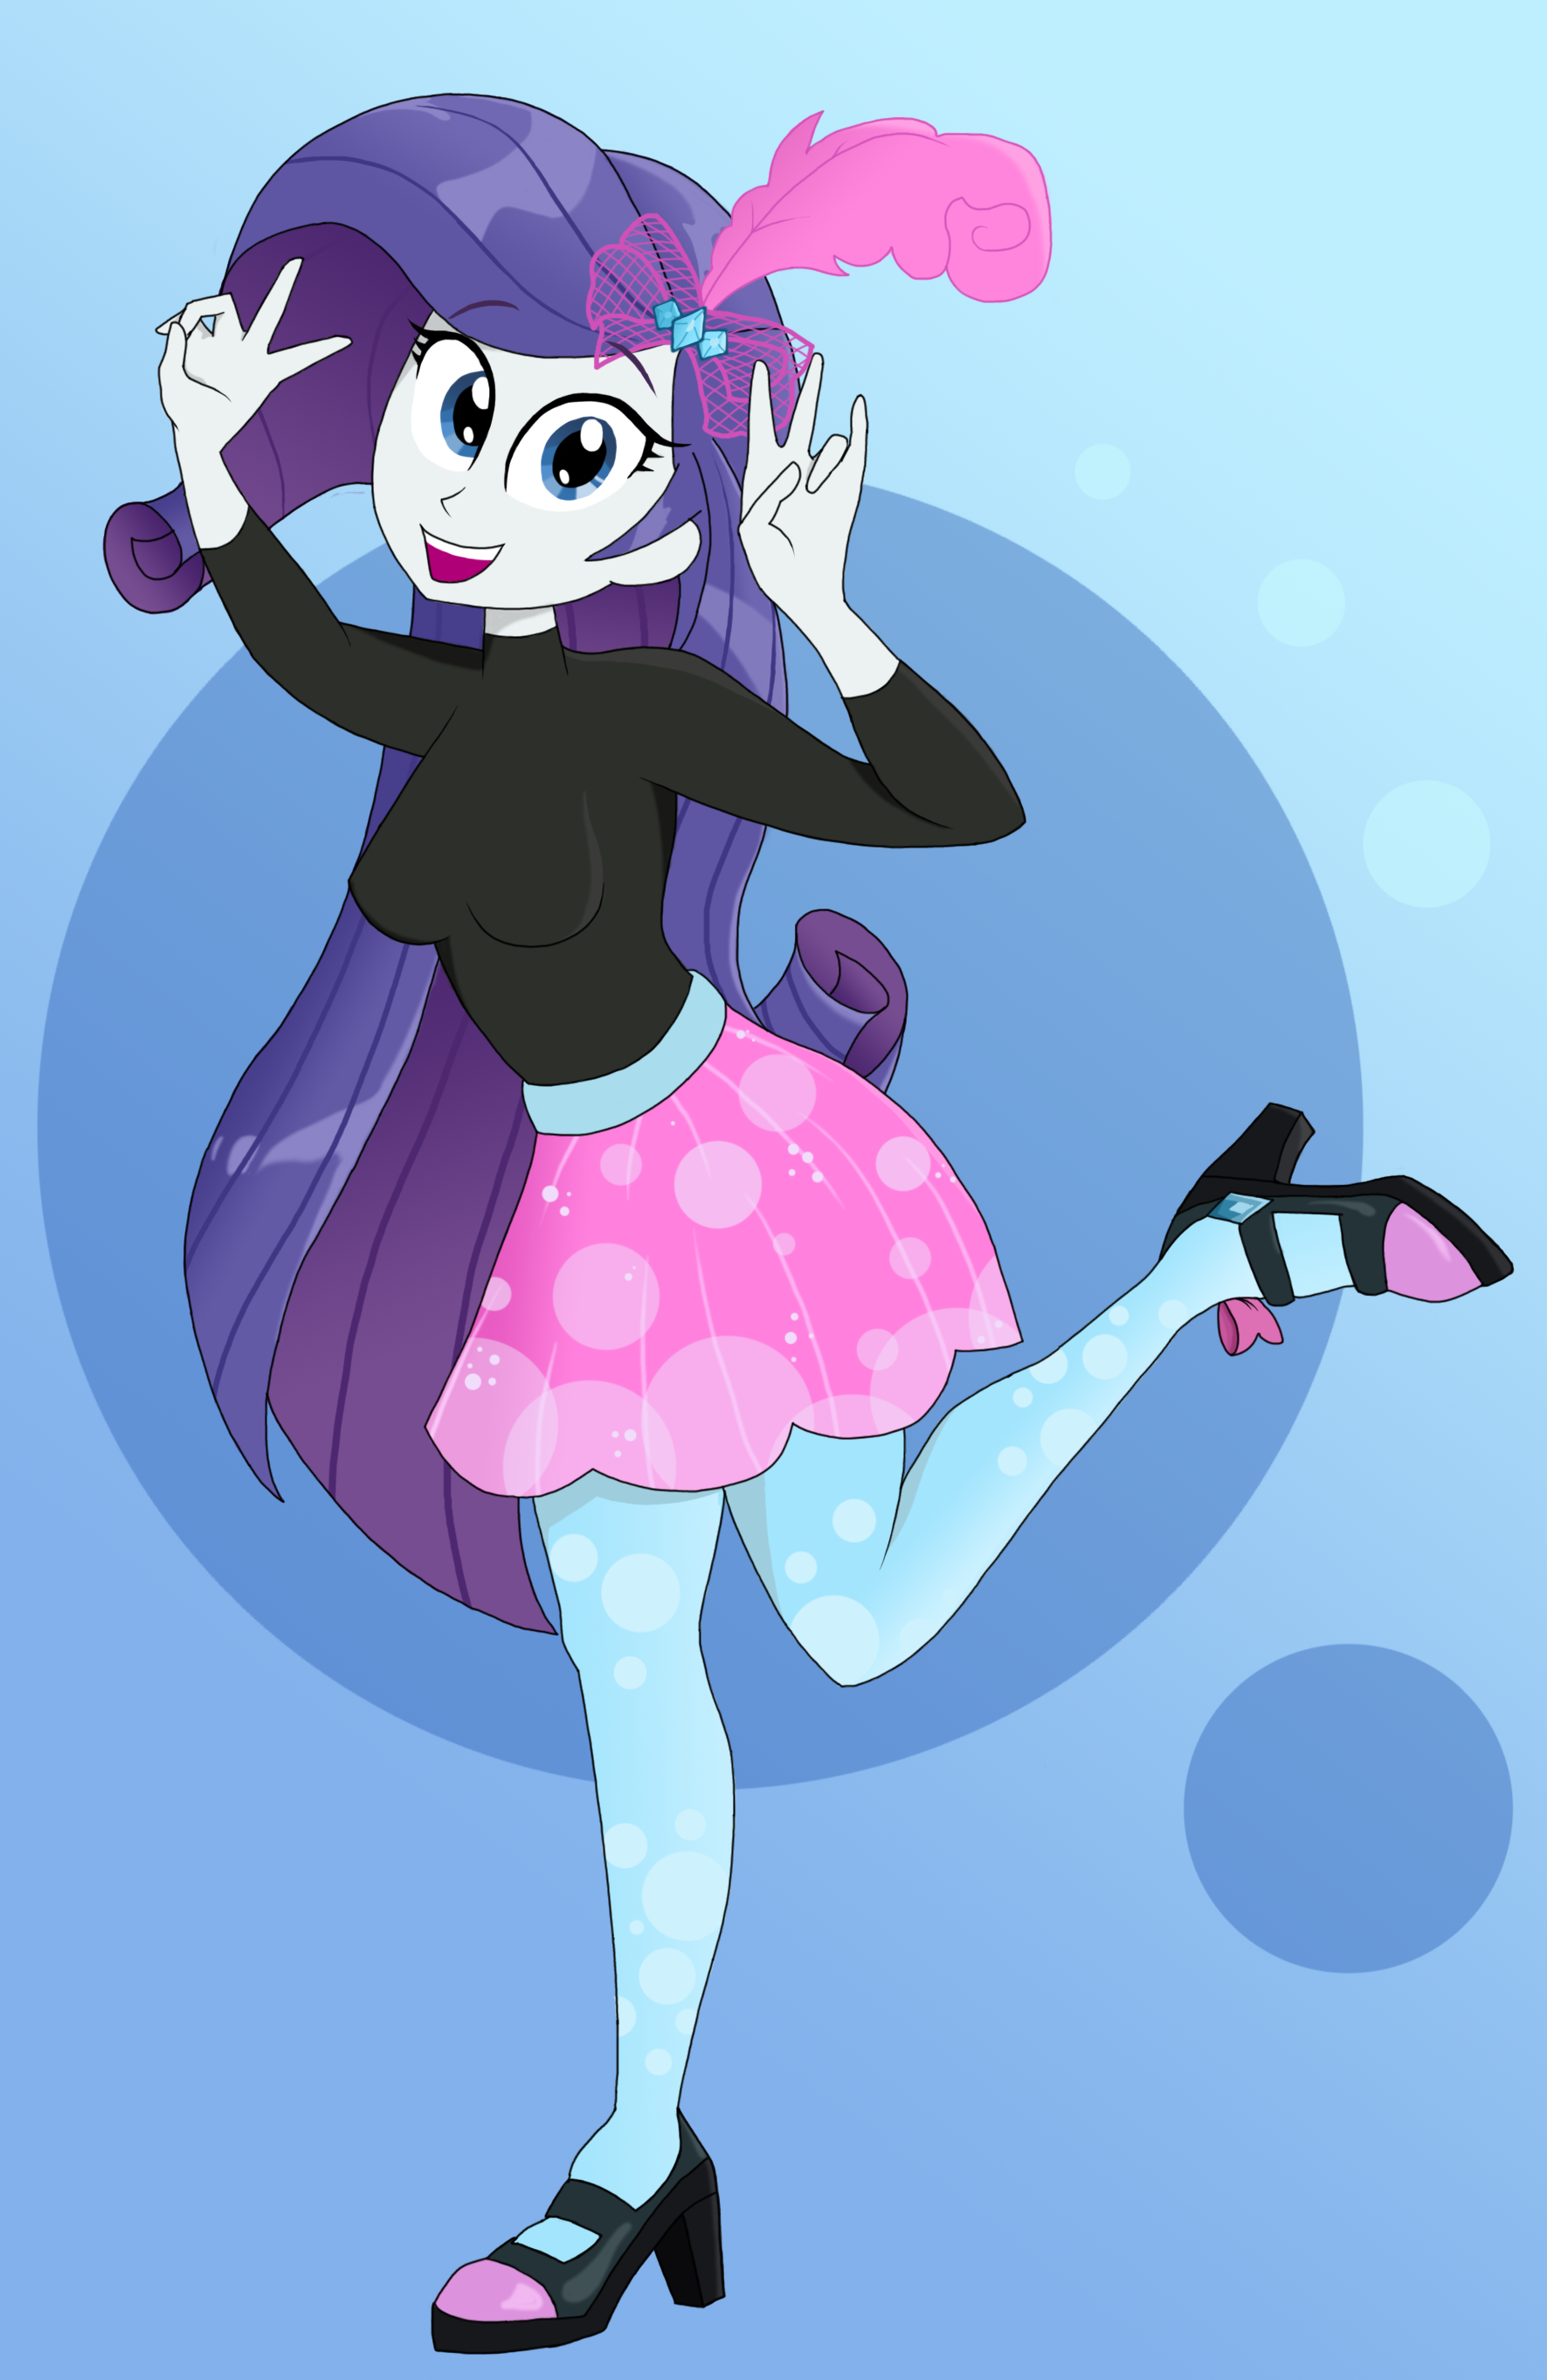 mall_rarity_by_iyoungsavage-dbsywum.png